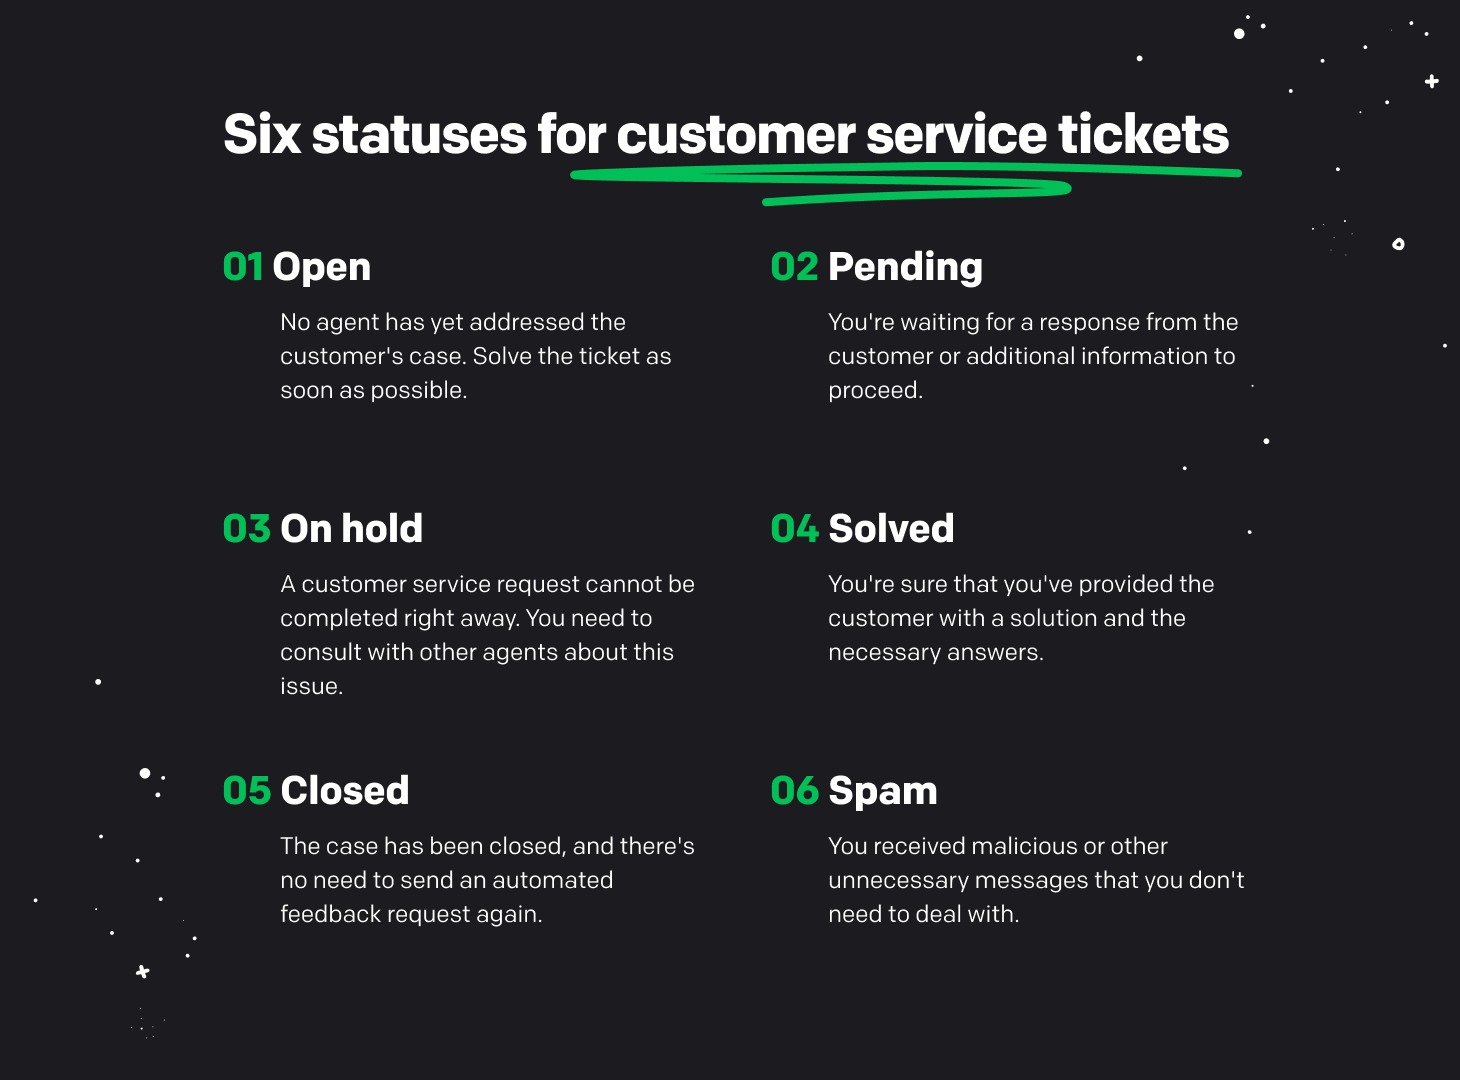 Six statuses for customer service tickets: Open, Pending, On hold, Solved, Closed, Spam.